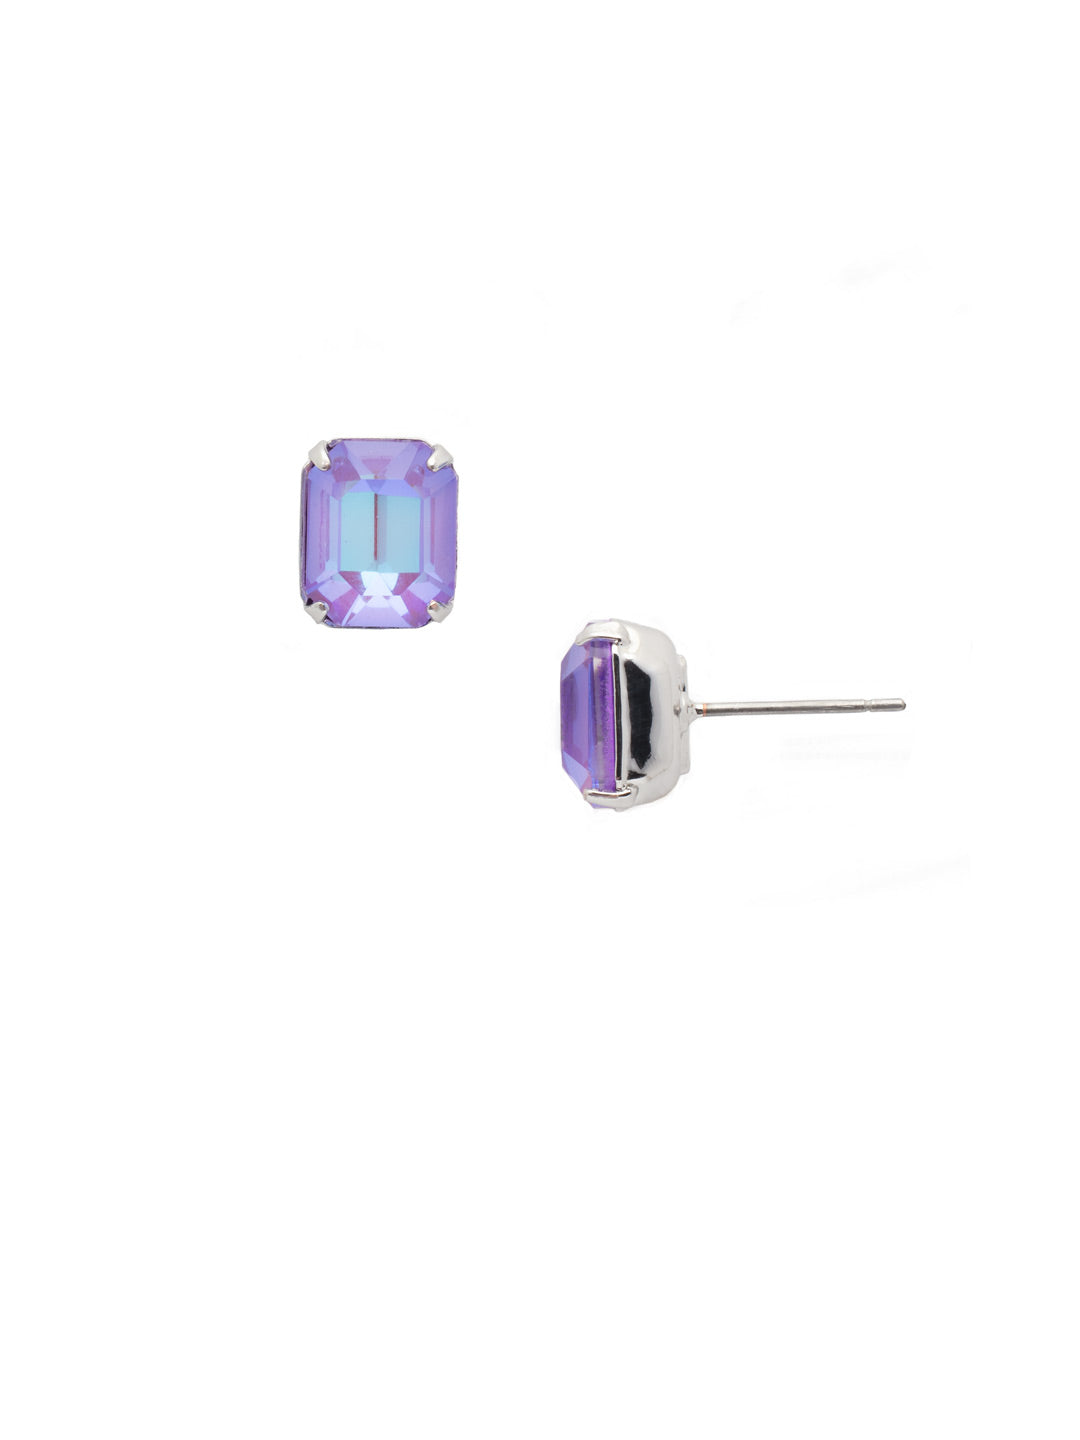 Octavia Stud Earrings - EDU53PDCCC - <p>These rounded emerald cut stud earrings can be worn alone or paired with anything for just a bit of extra bling! From Sorrelli's Cotton Candy Clouds collection in our Palladium finish.</p>